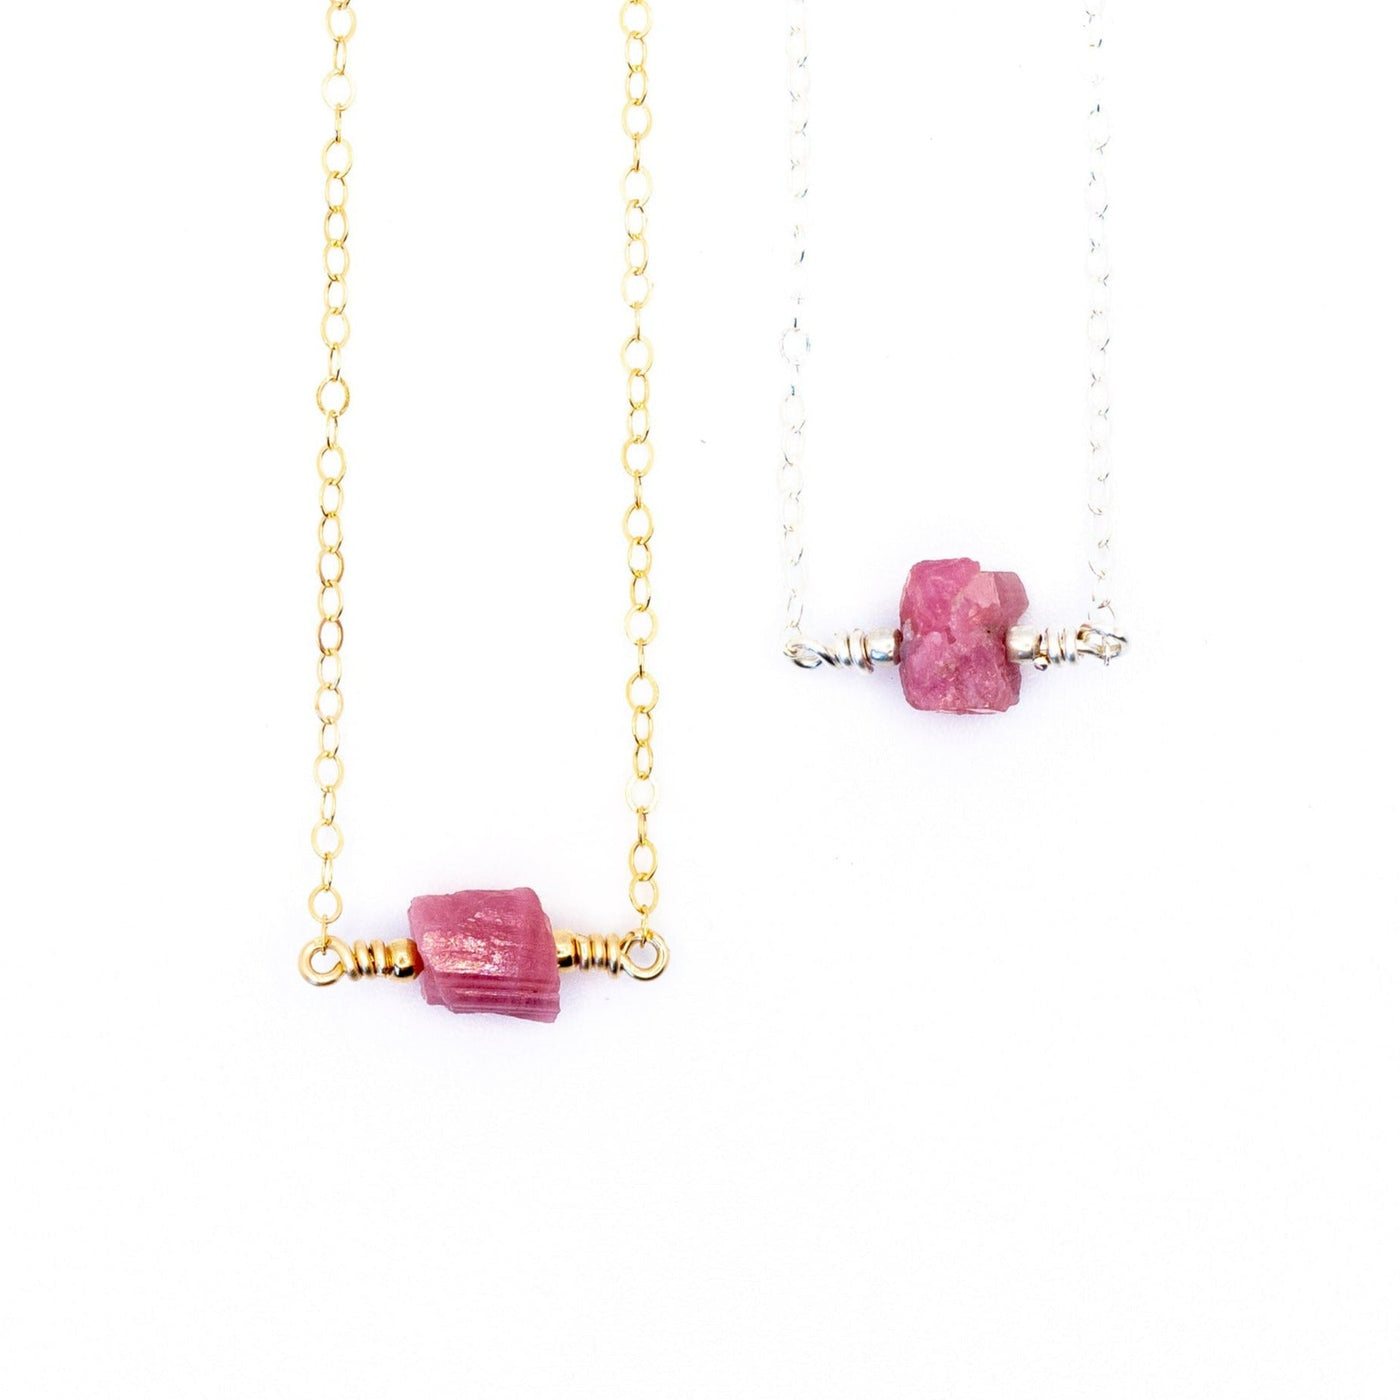 Topaz & Pearl Necklaces Raw Pink Tourmaline Necklace